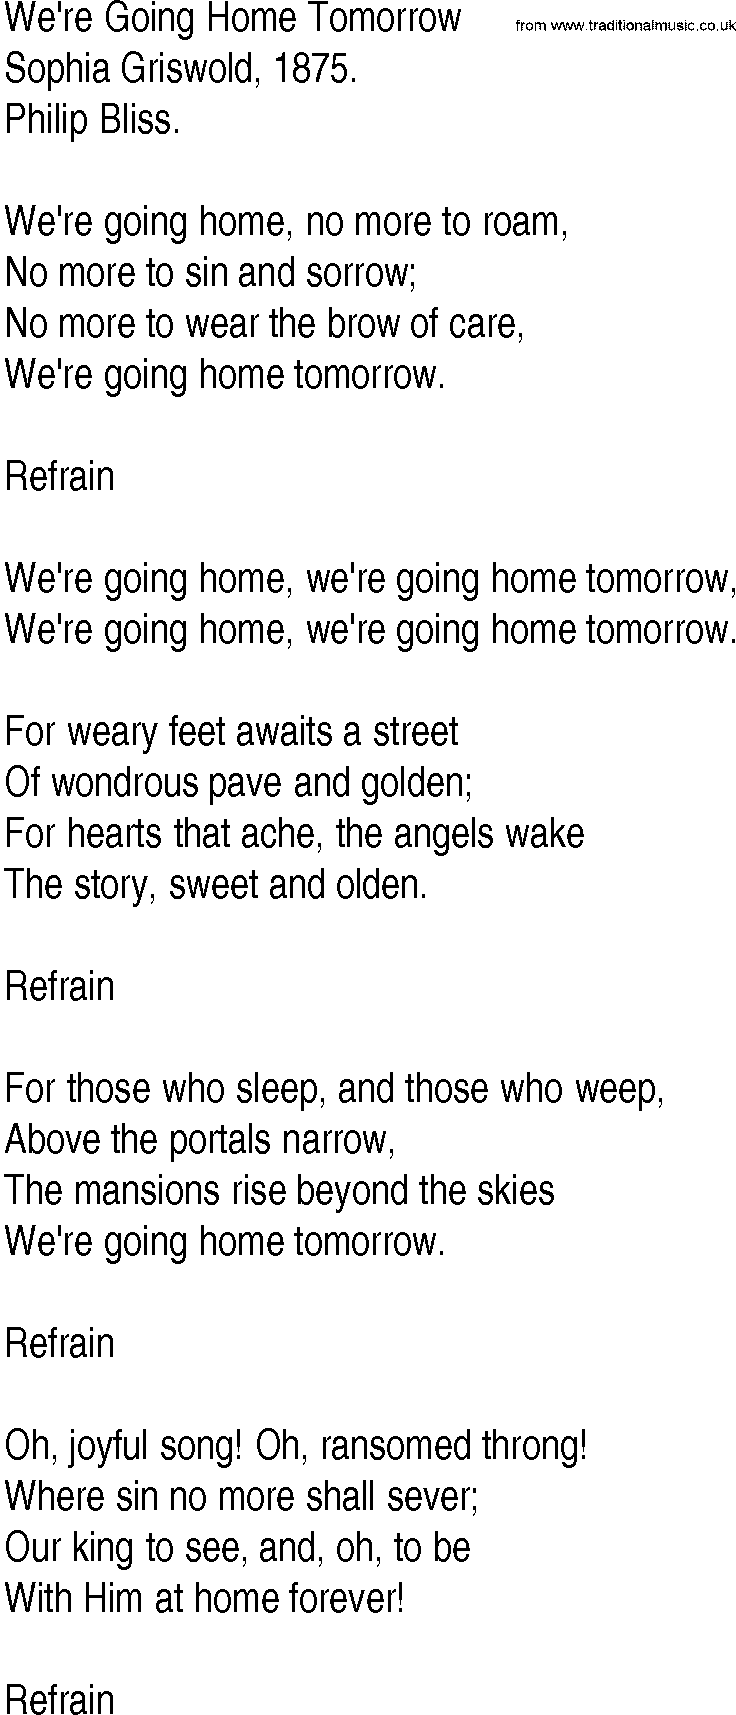 Hymn and Gospel Song: We're Going Home Tomorrow by Sophia Griswold lyrics